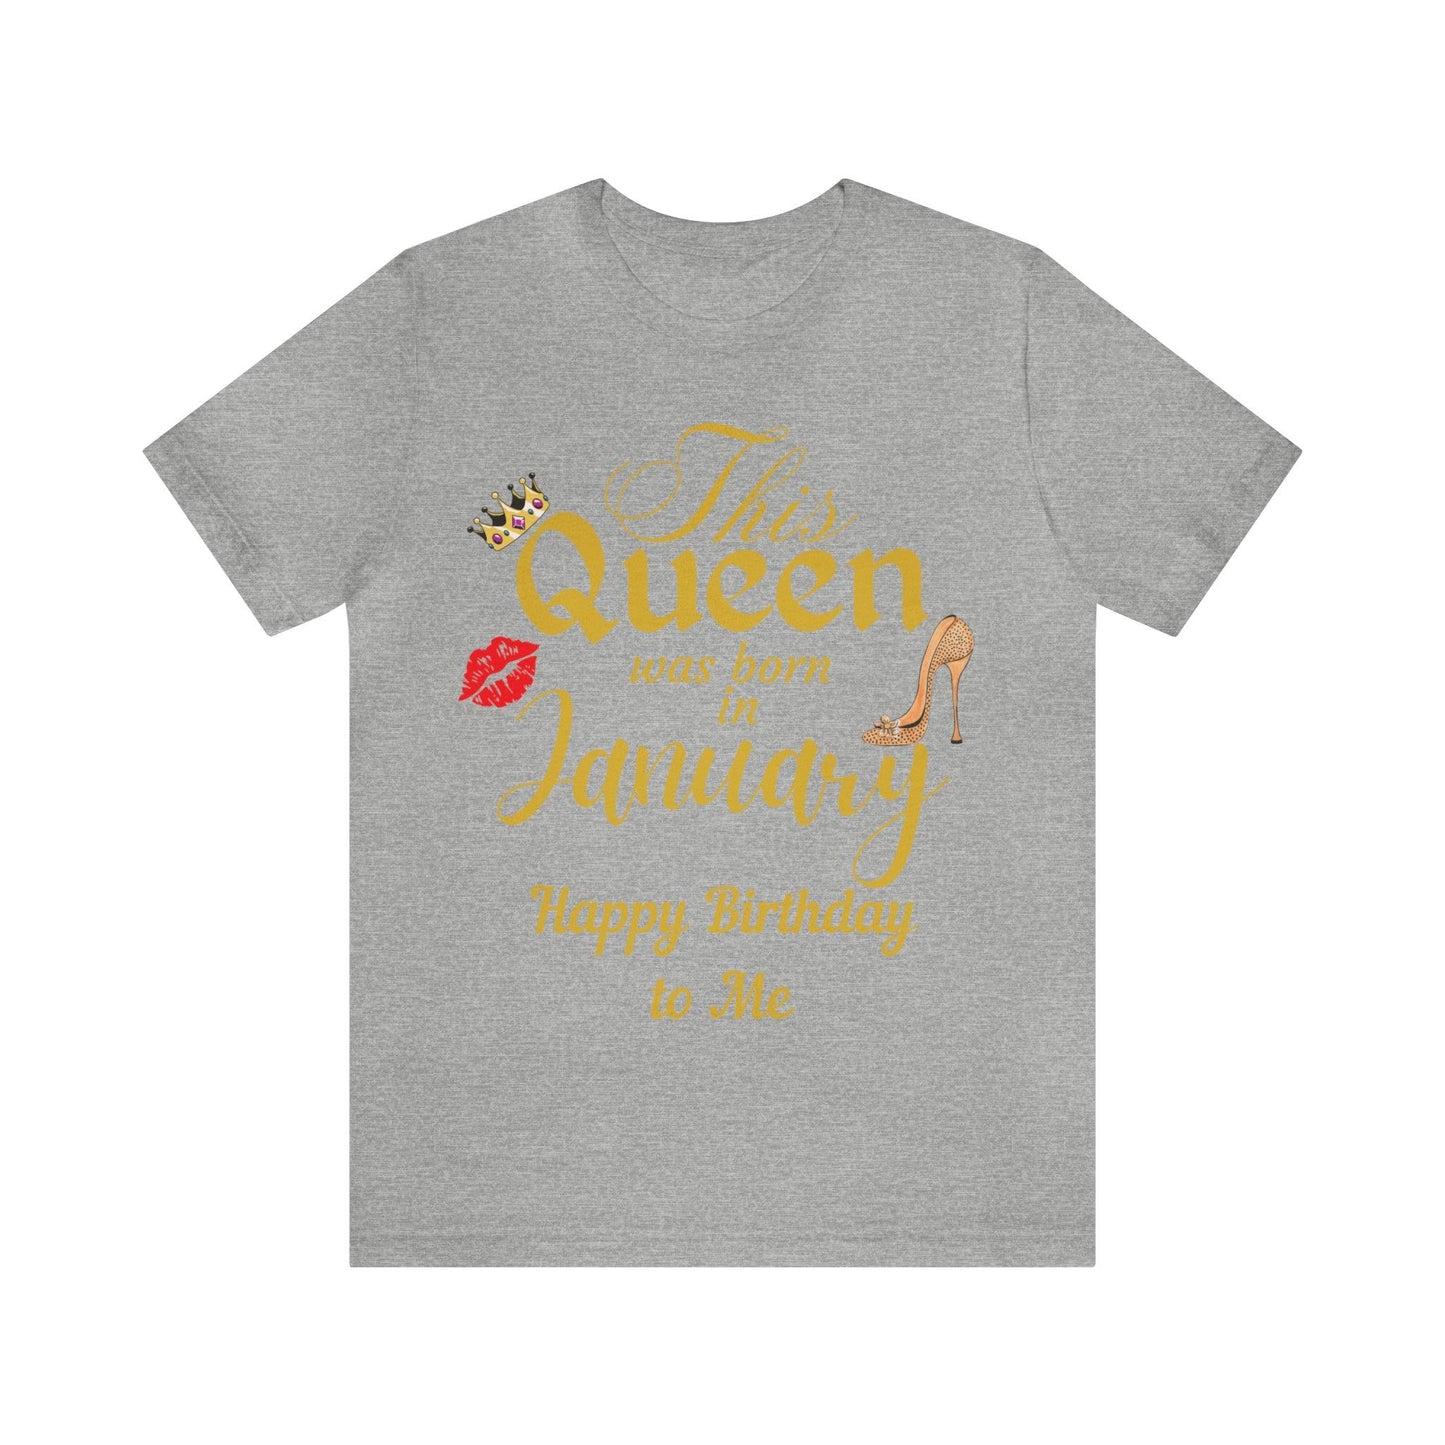 Birthday Queen Shirt, Gift for Birthday, This Queen was born in January Shirt, Funny Queen Shirt, Funny Birthday Shirt, Birthday Gift